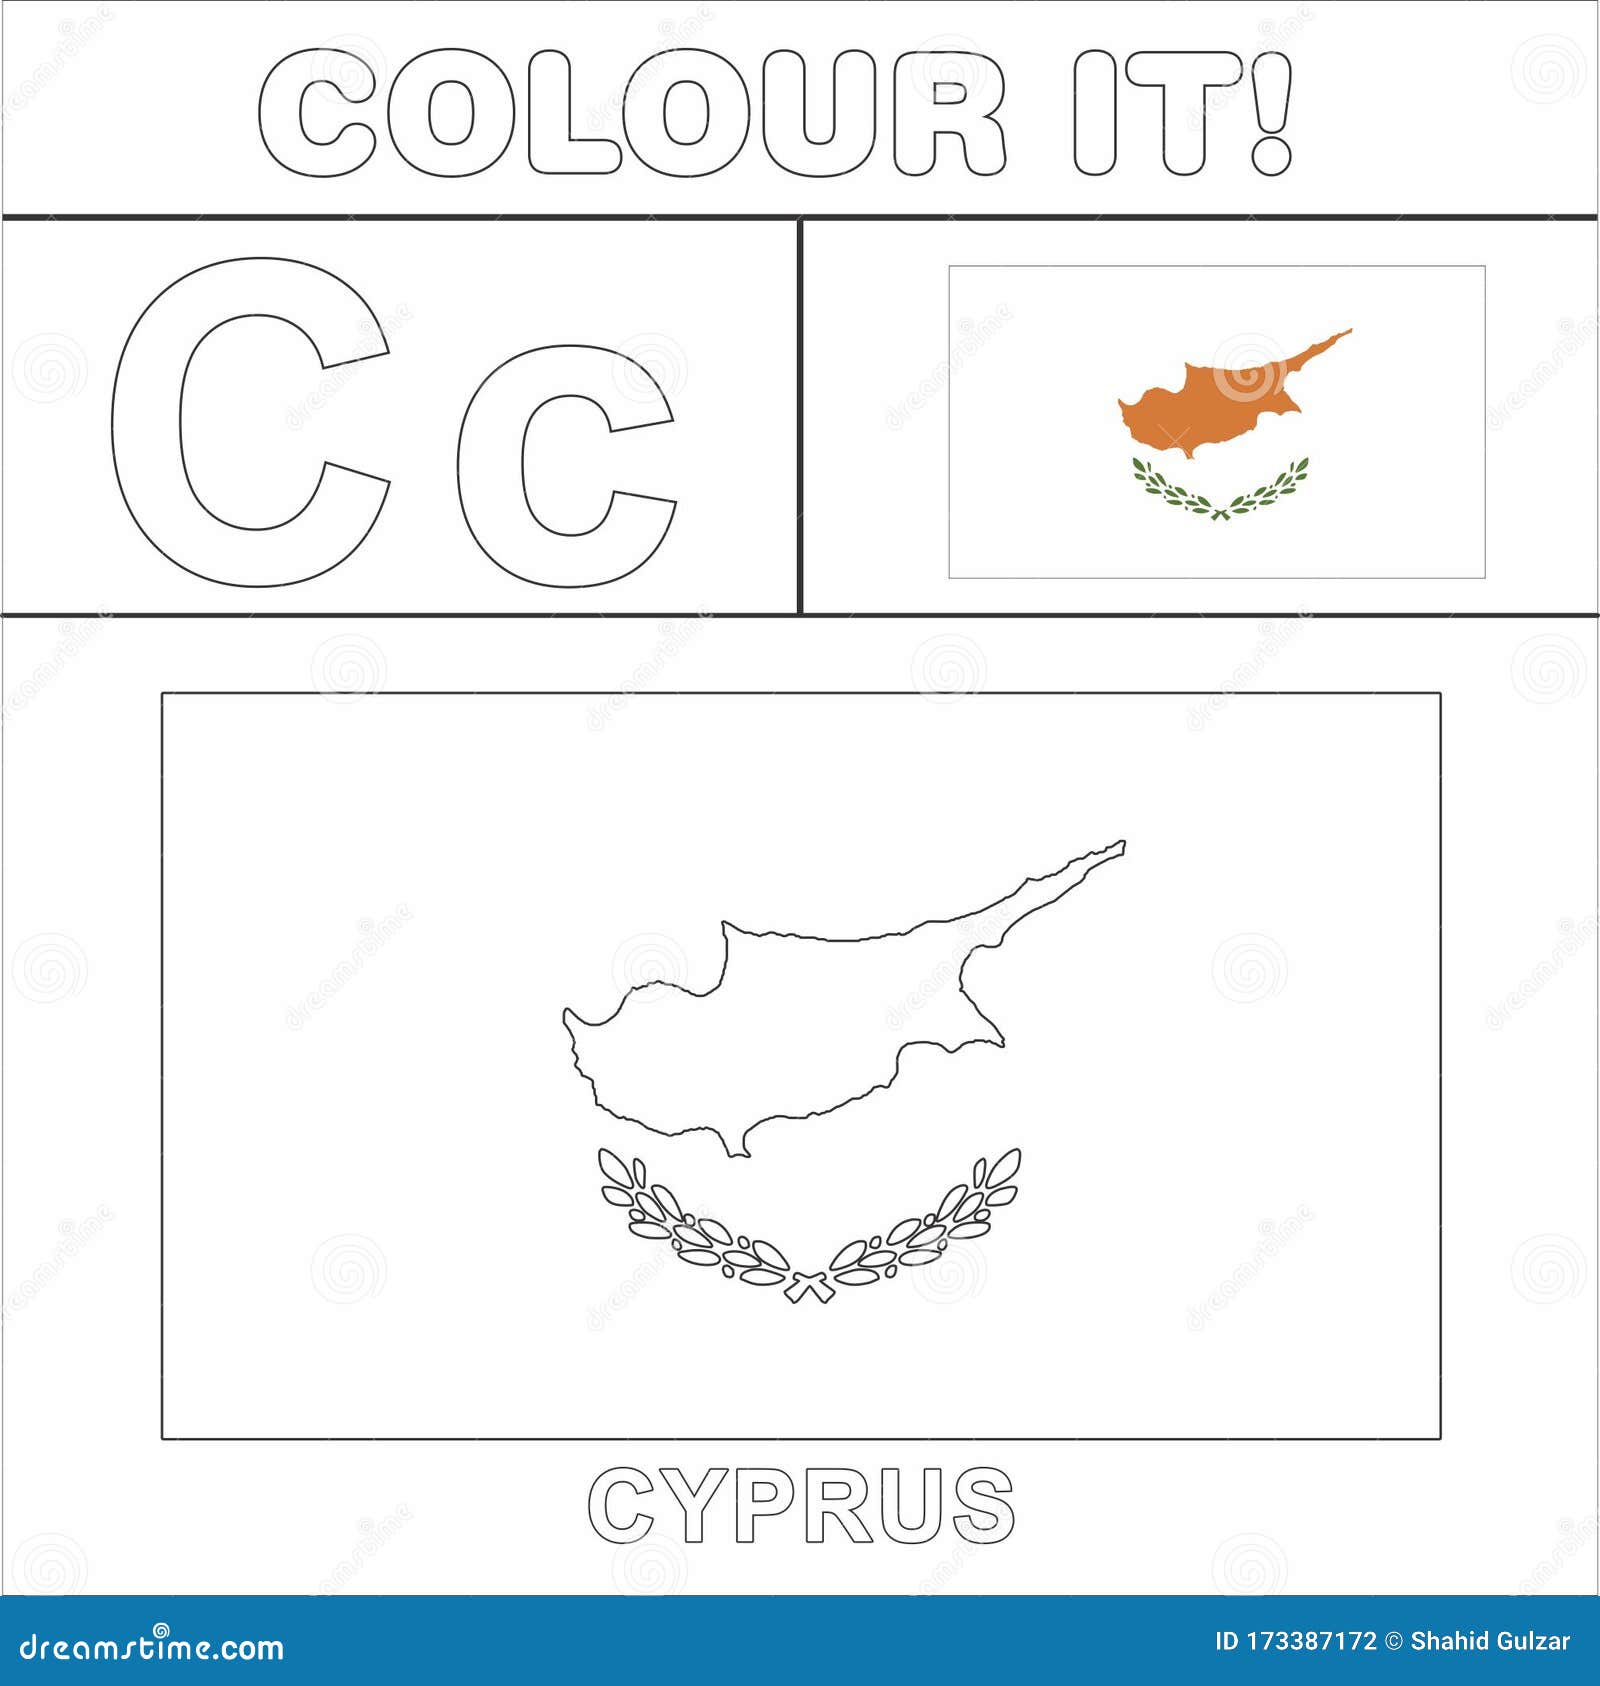 Download Colour It Kids Colouring Page Country Starting From English Letter `C` Cyprus How To Color Flag ...